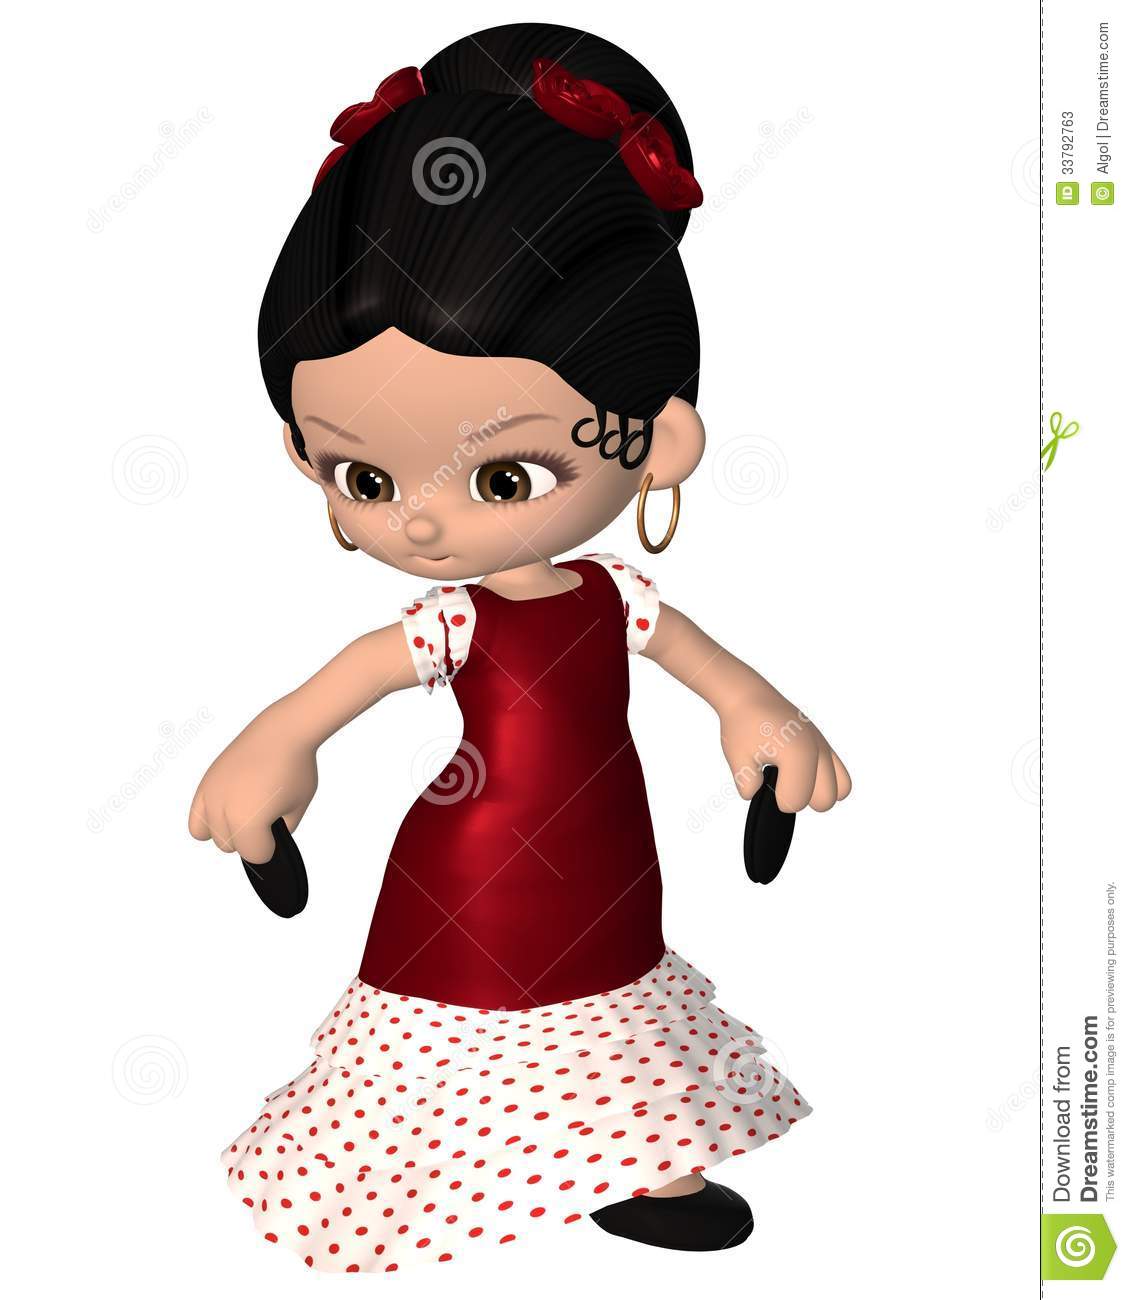 Cute Toon Spanish Flamenco Dancer With Castanets And Red Dress 3d